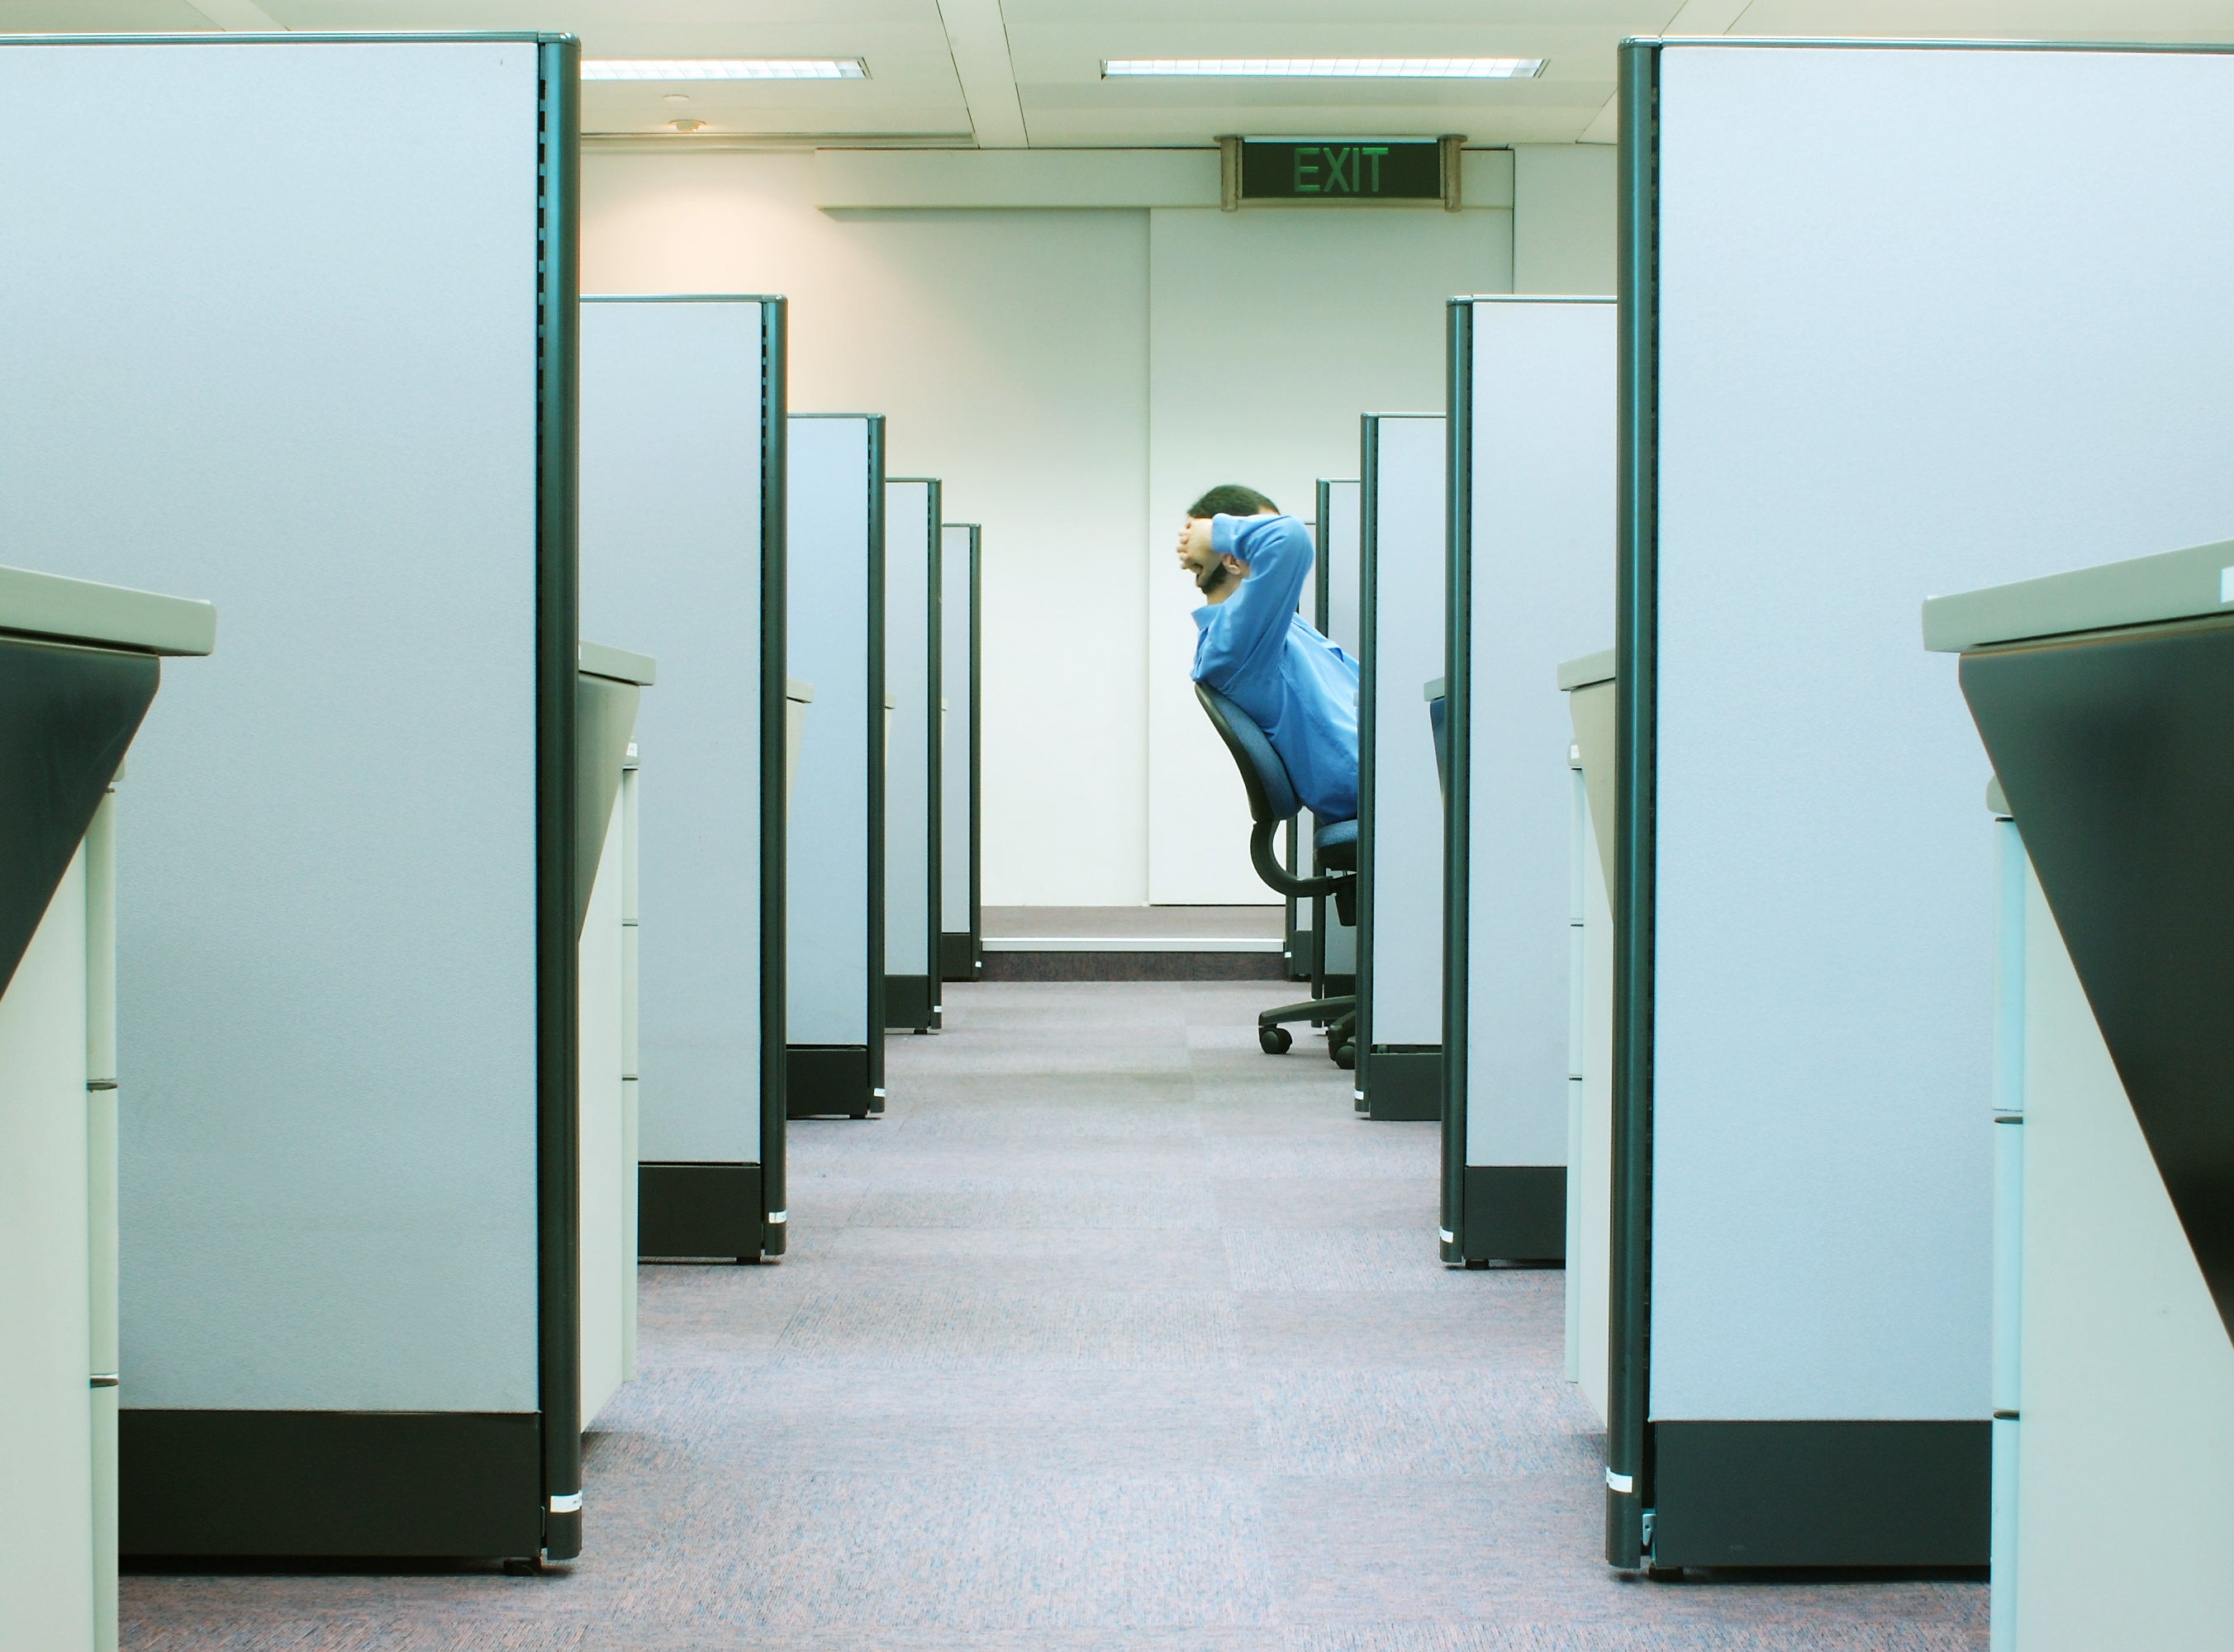 3 Mistakes to Avoid in a Post-Pandemic Hybrid Office Environment